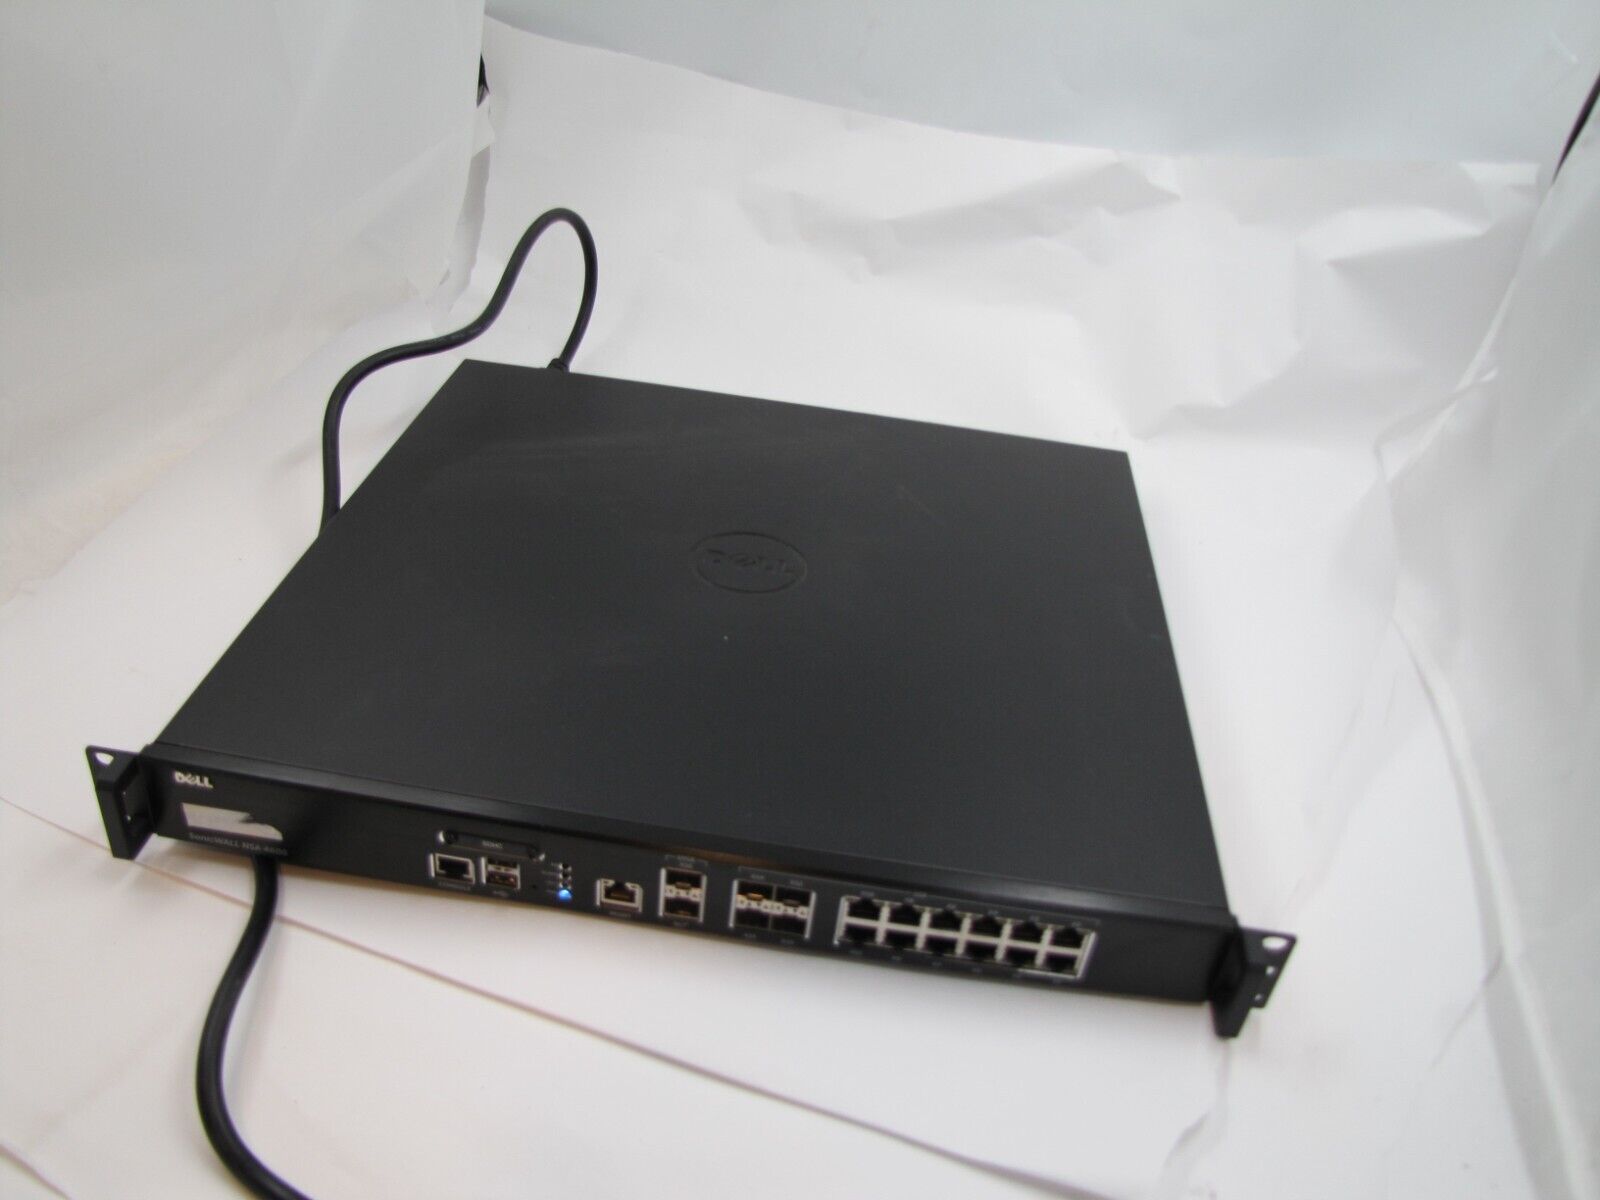 Dell SonicWall NSA 4600 Firewall 12 Port Network Security Appliance  1RK26-0A3